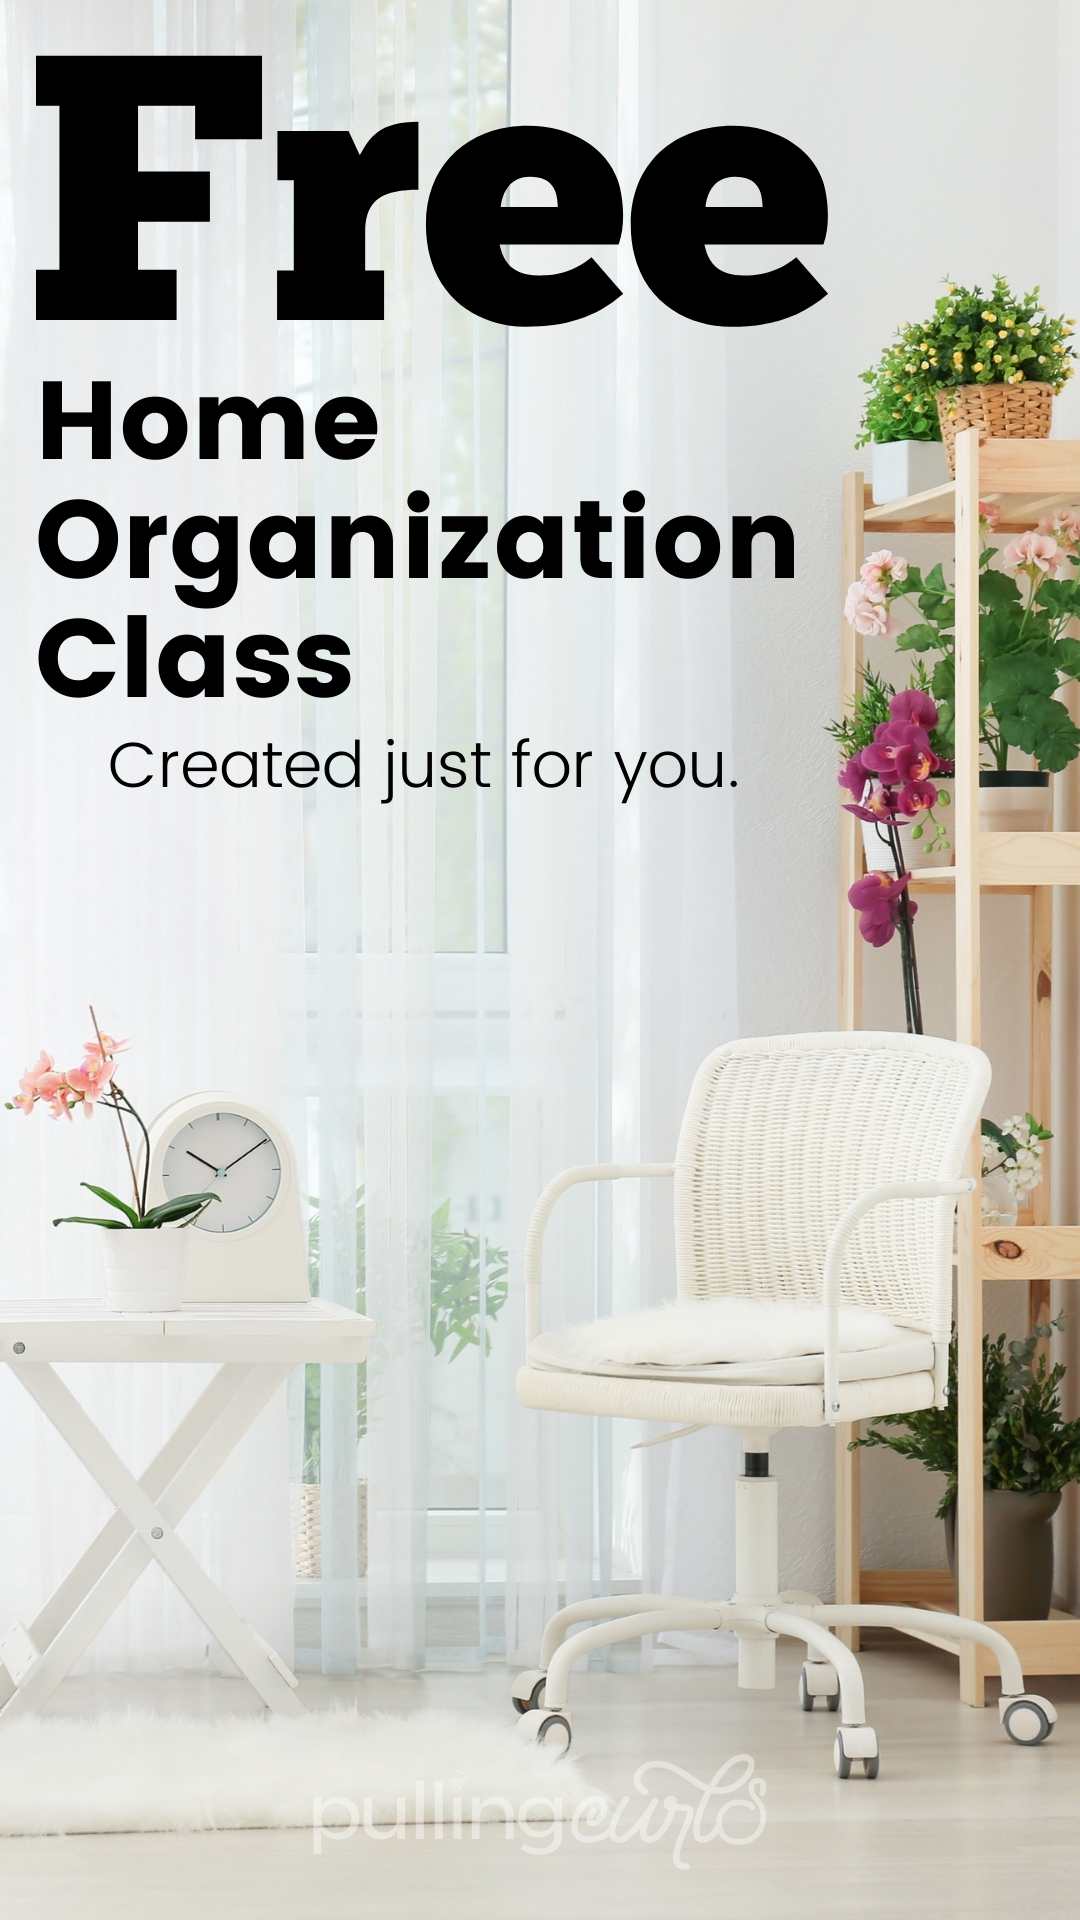 Are you feeling overwhelmed by the amount of stuff in your home? Do you feel like your house is constantly cluttered and you don't know where to start to fix it? If so, join us for our free home organization class! In this class, we'll teach you how to get organized once and for all. You'll learn how to create systems that work for your unique lifestyle, and we'll provide tips and tricks for dealing with common clutter traps. Don't miss out – sign up today! via @pullingcurls